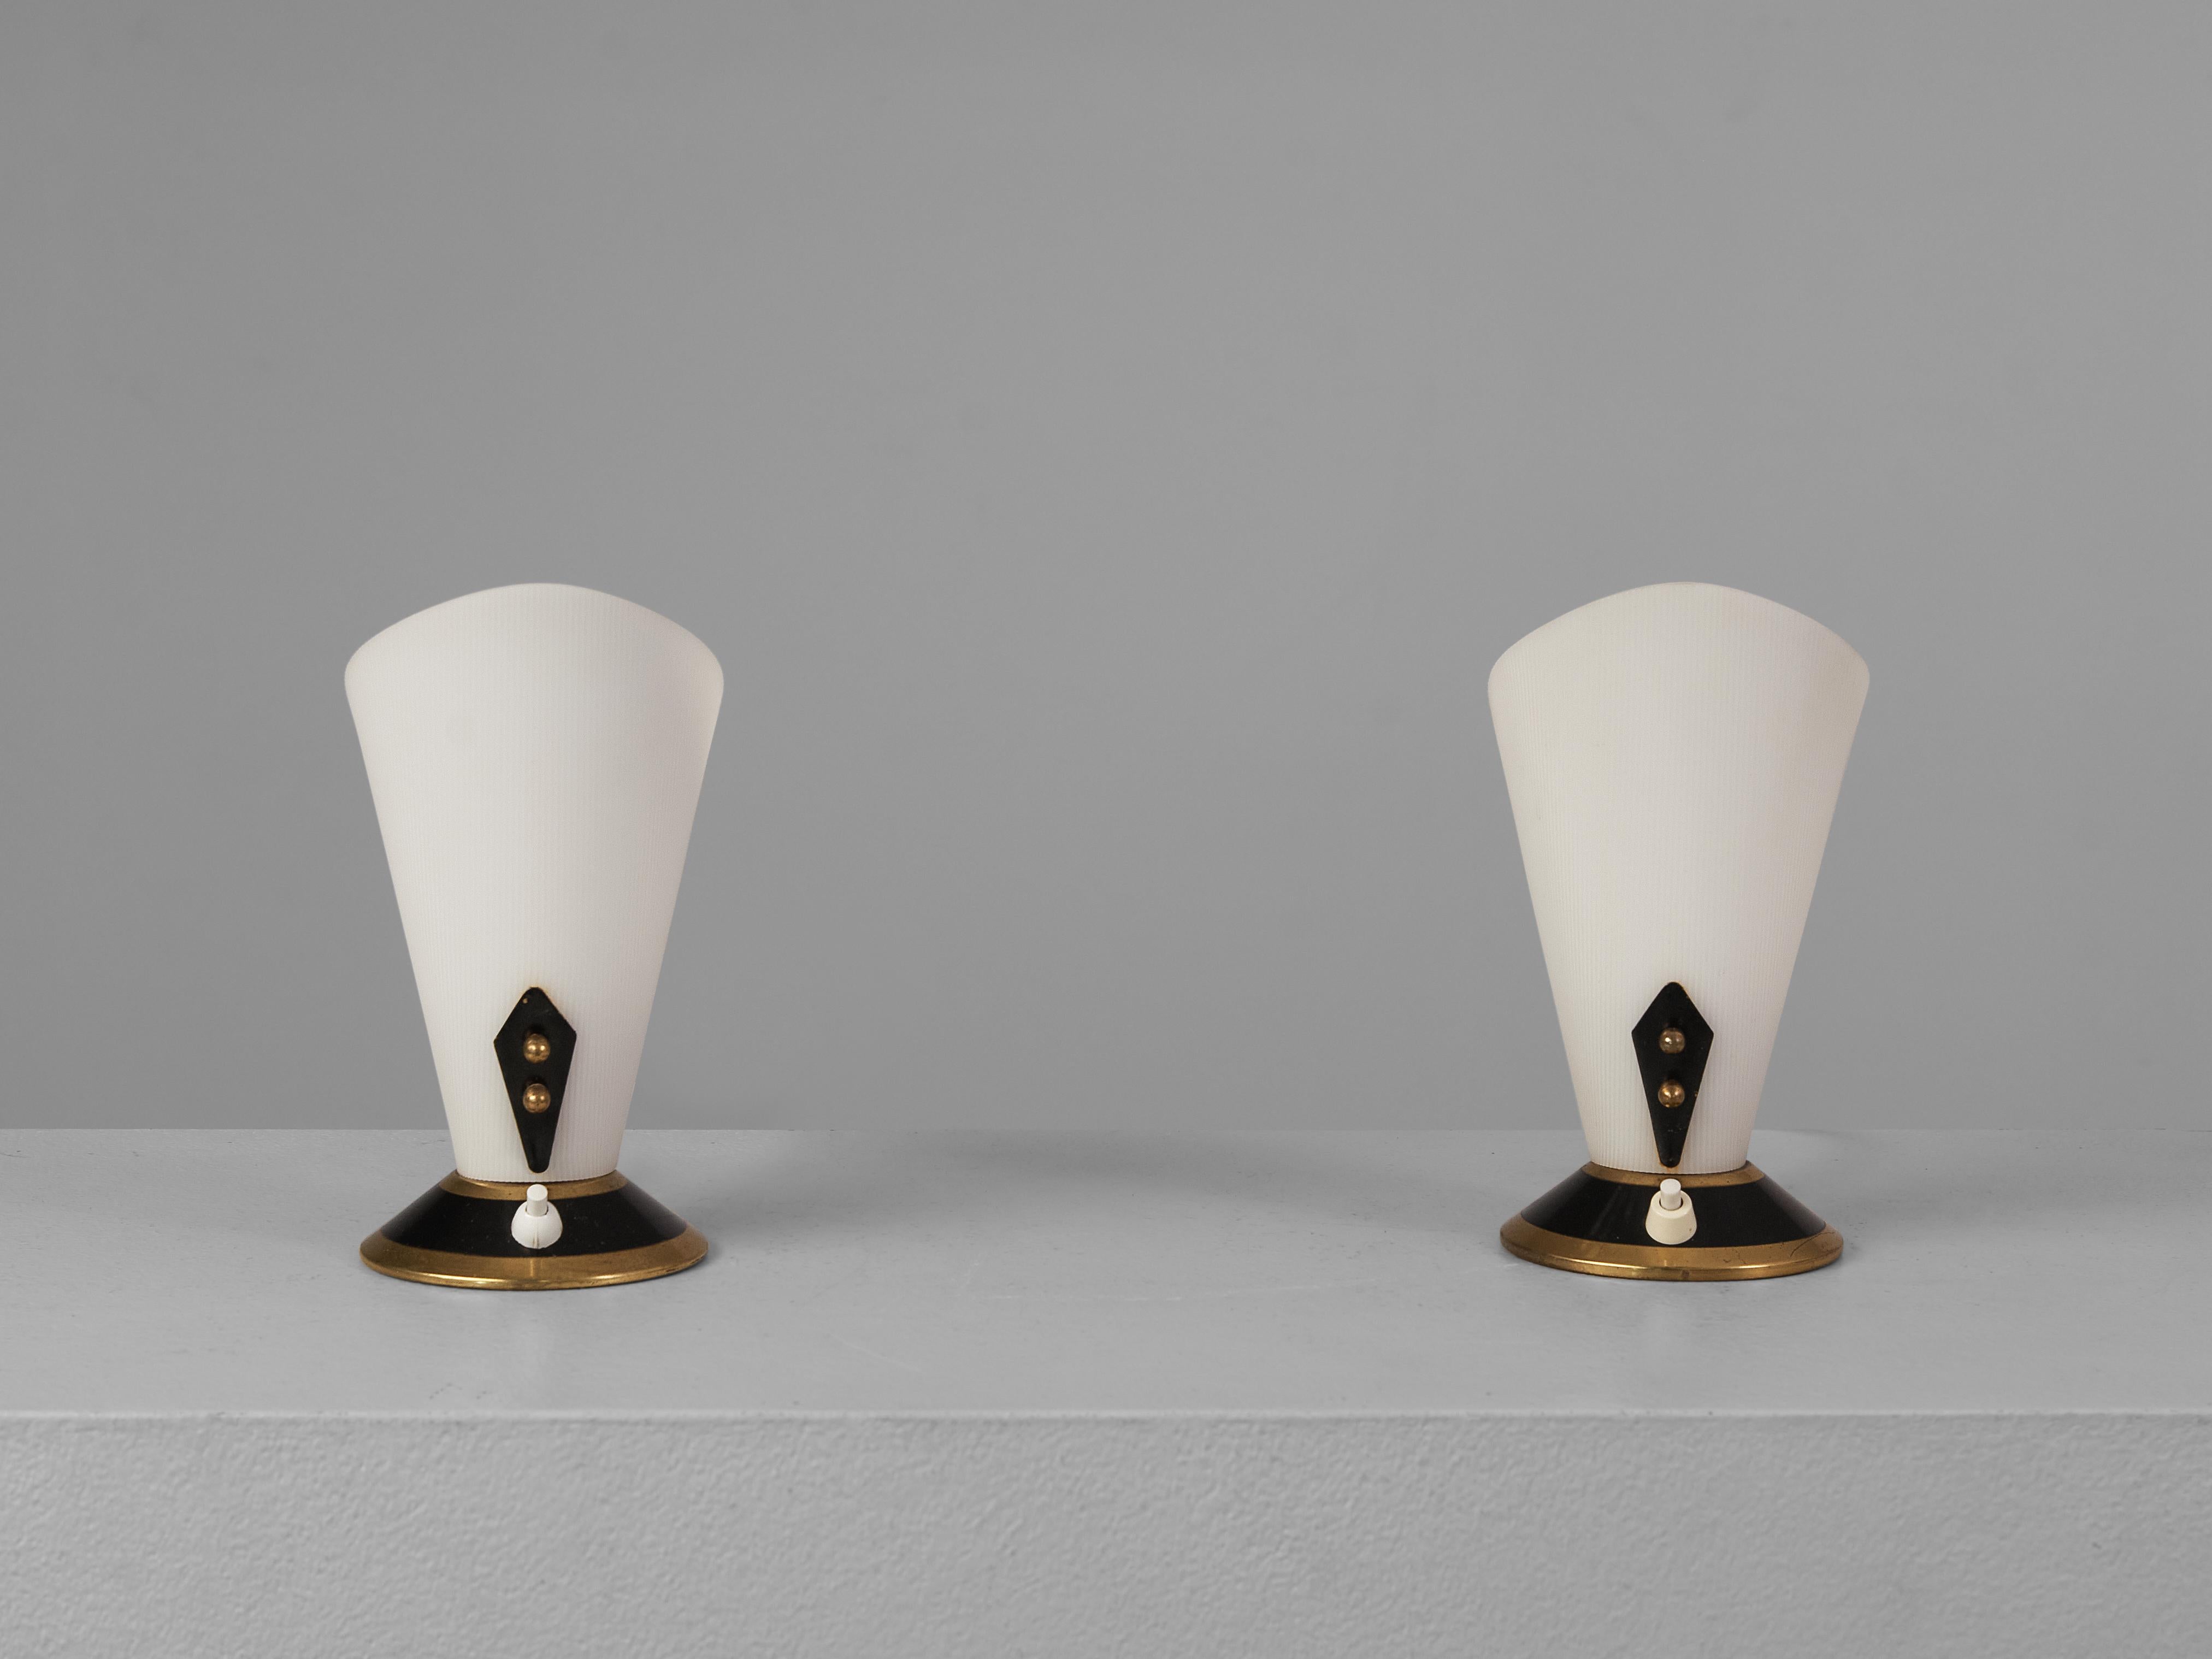 Pair of Small Table Lamps in Black Gold and White 1